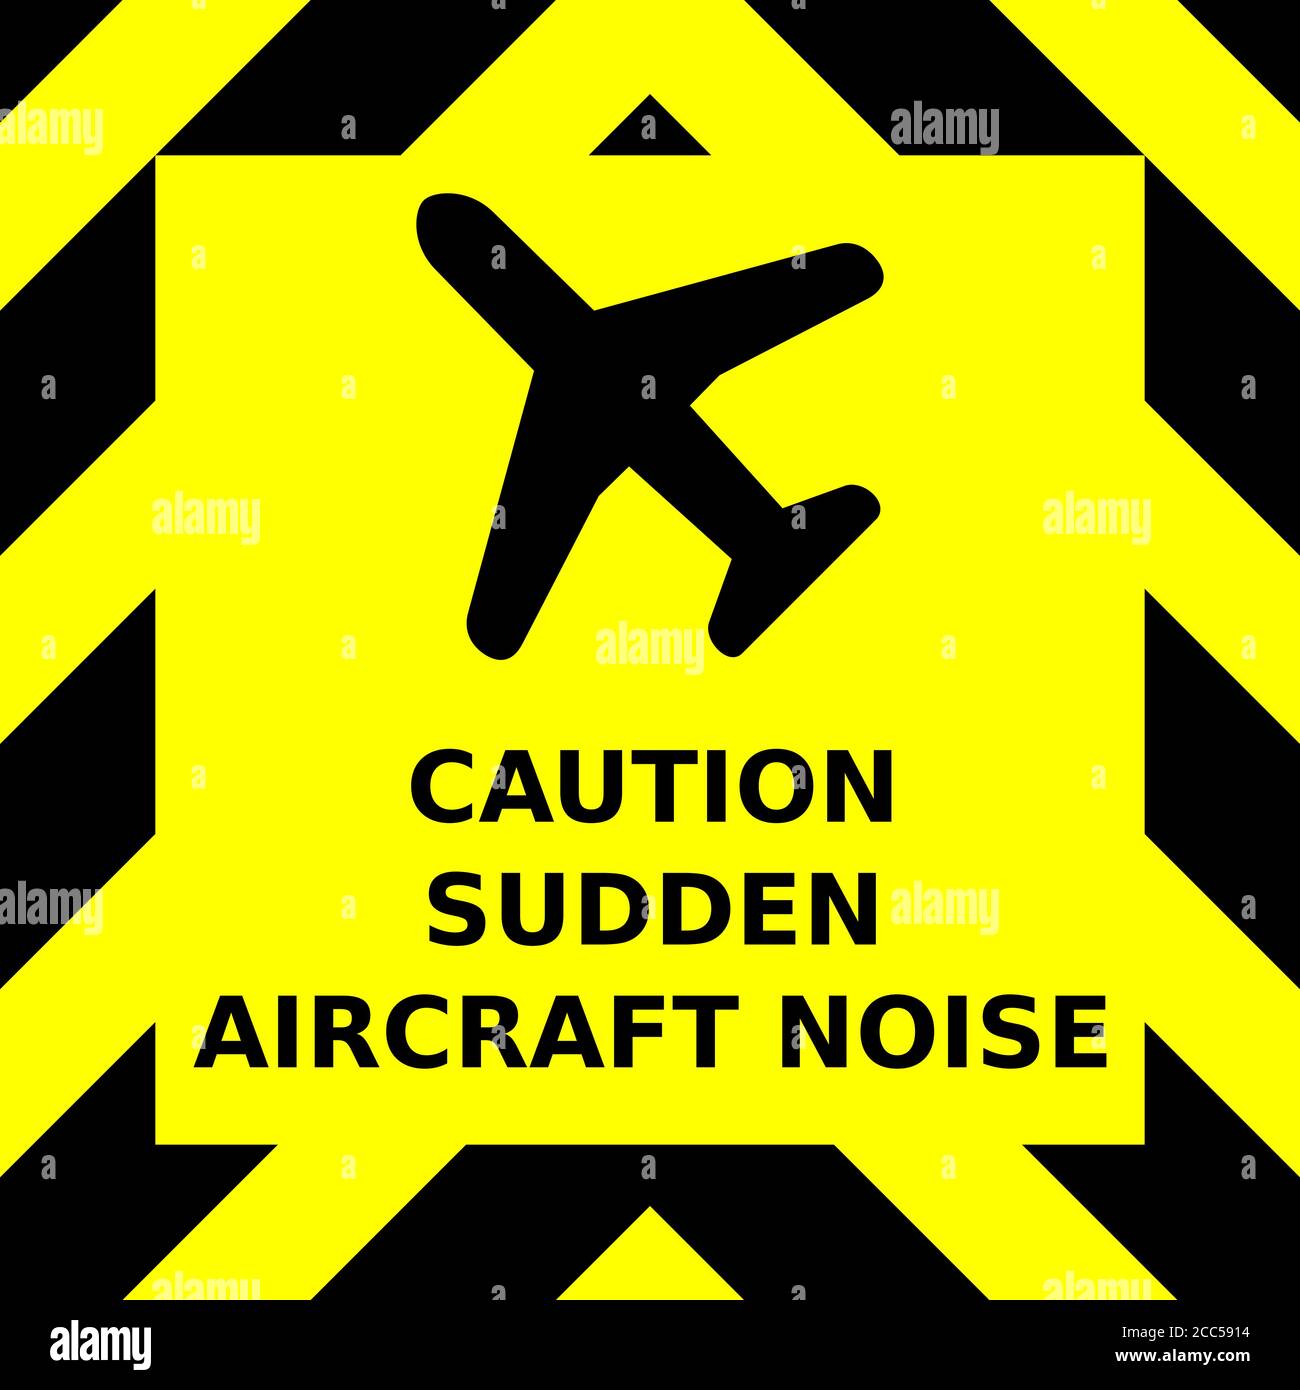 Black and yellow chevron vector graphic sign advising caution because of sudden aircraft noise Stock Vector